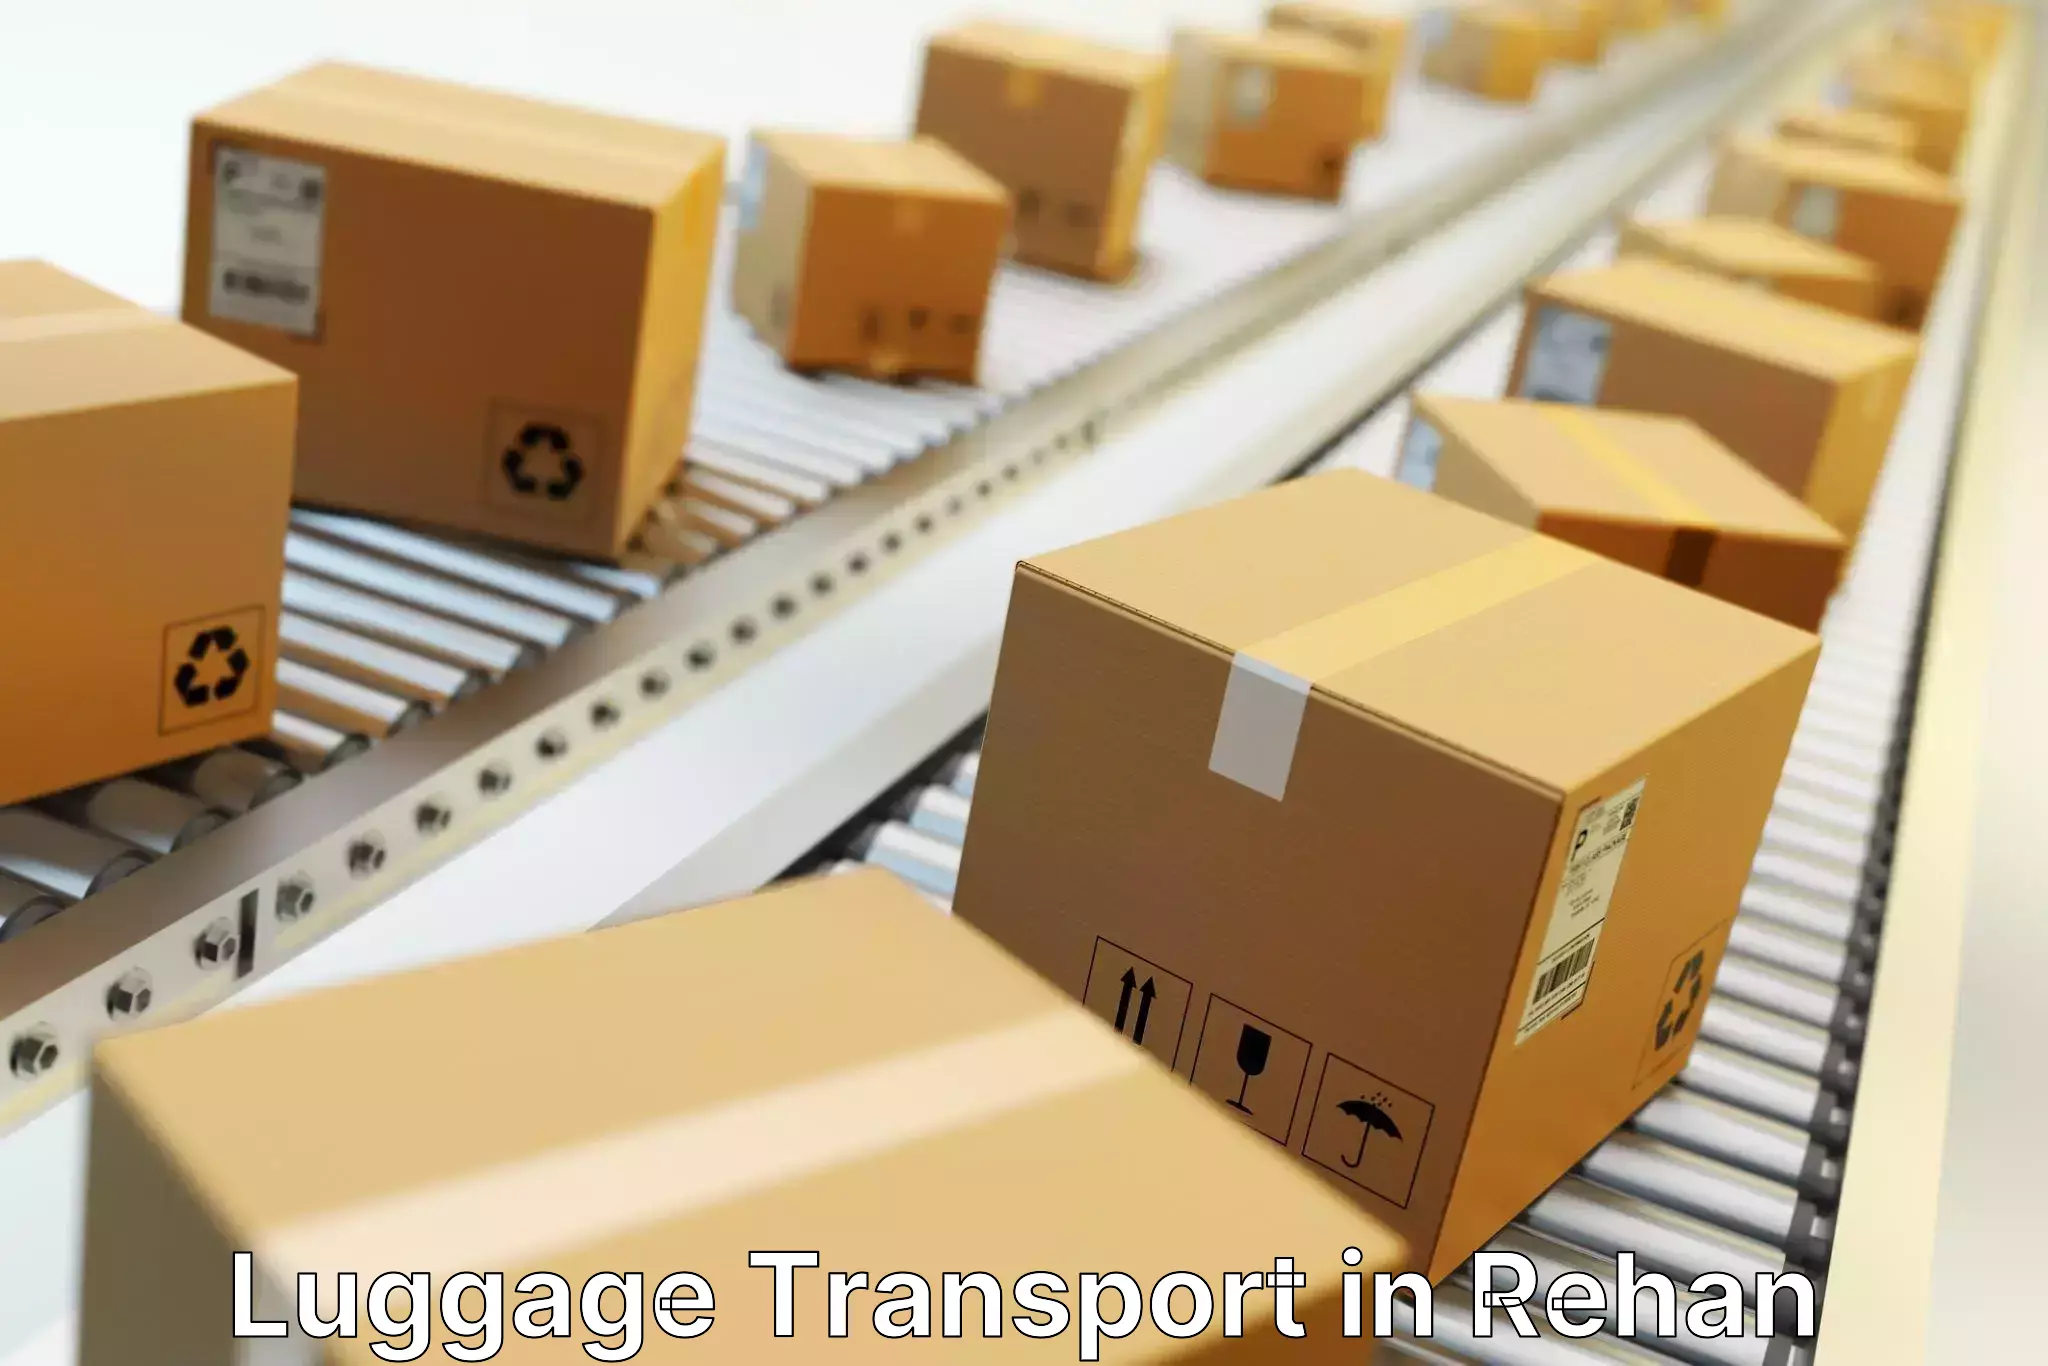 Luggage shipping trends in Rehan